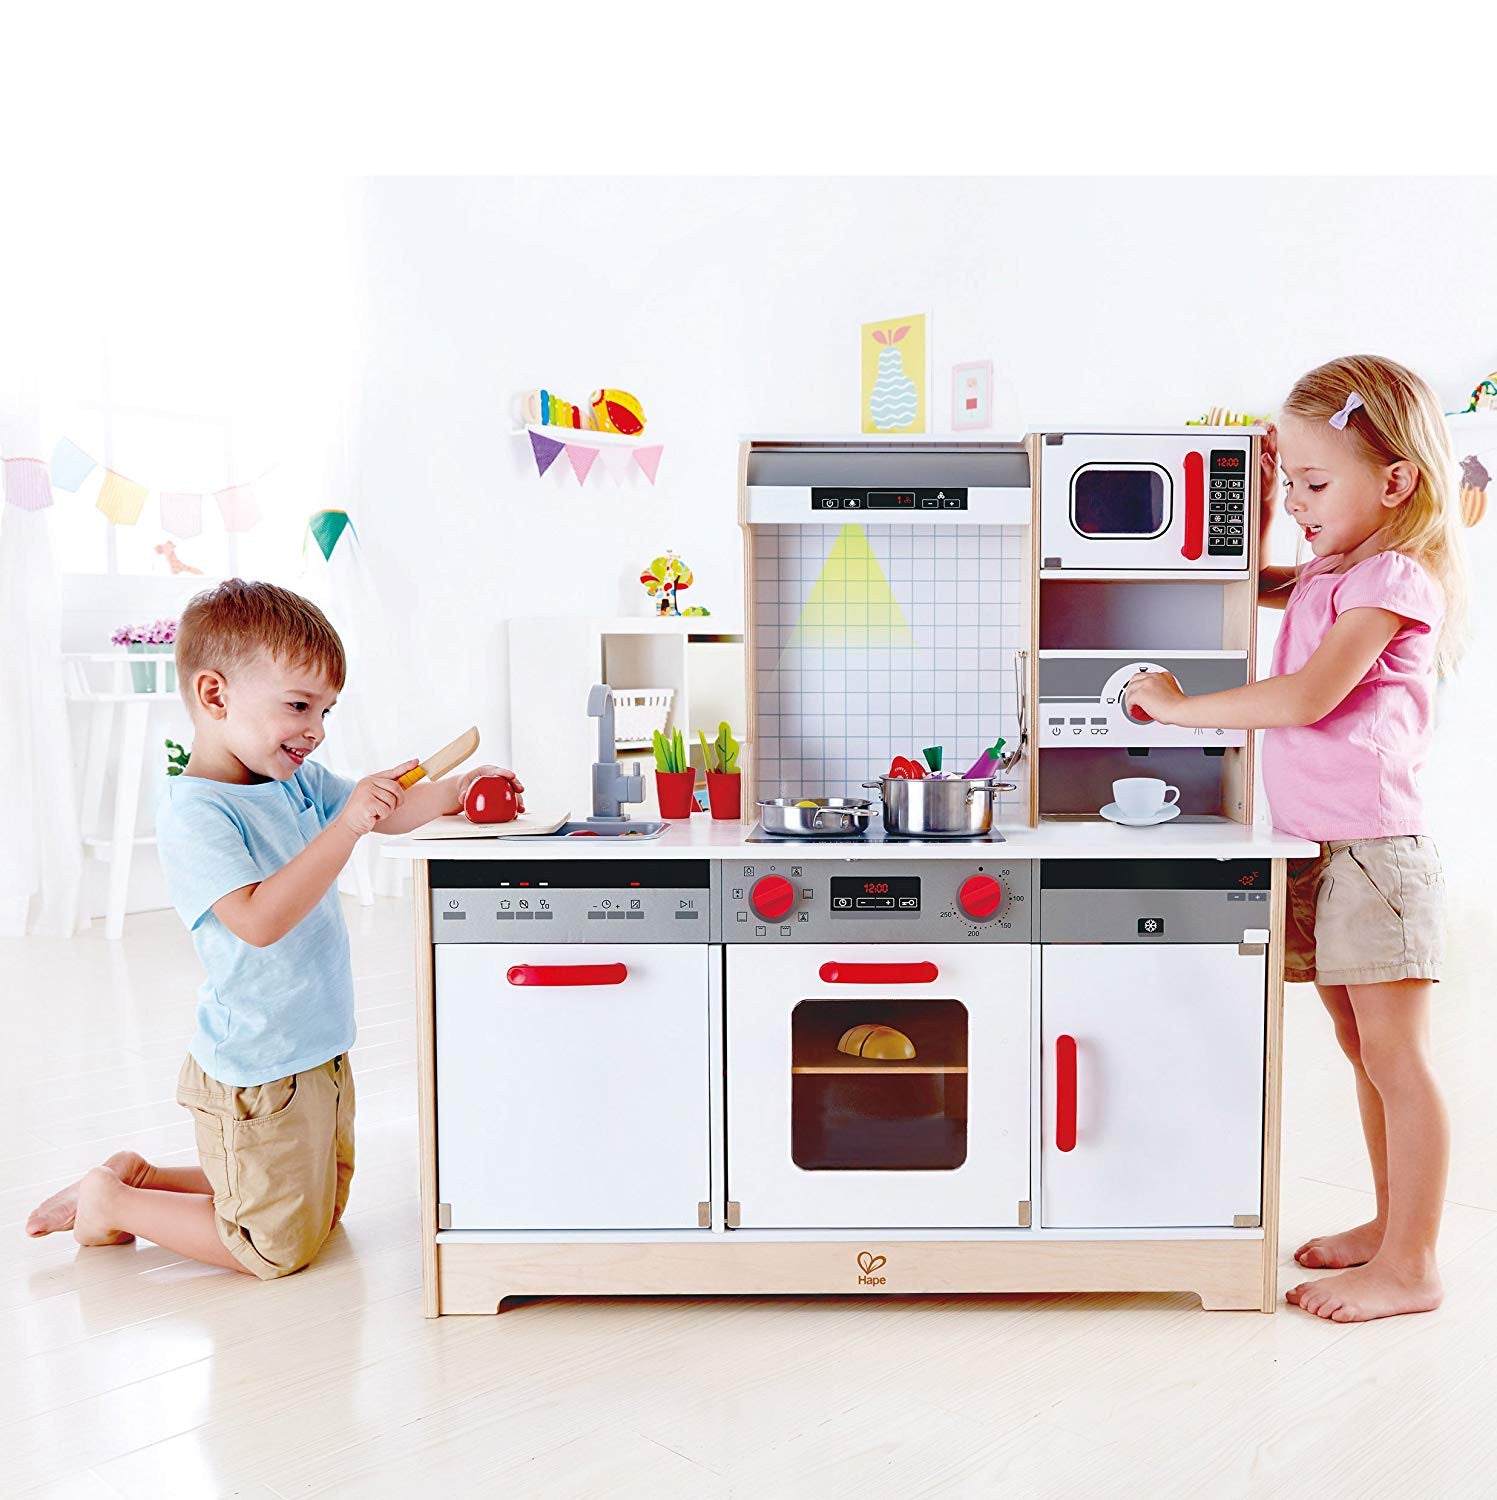 Hape All In One Kitchen E3145 Award Winning Wooden Toy Encourages Sharing, Imagination, Role Play And Creativity Skills